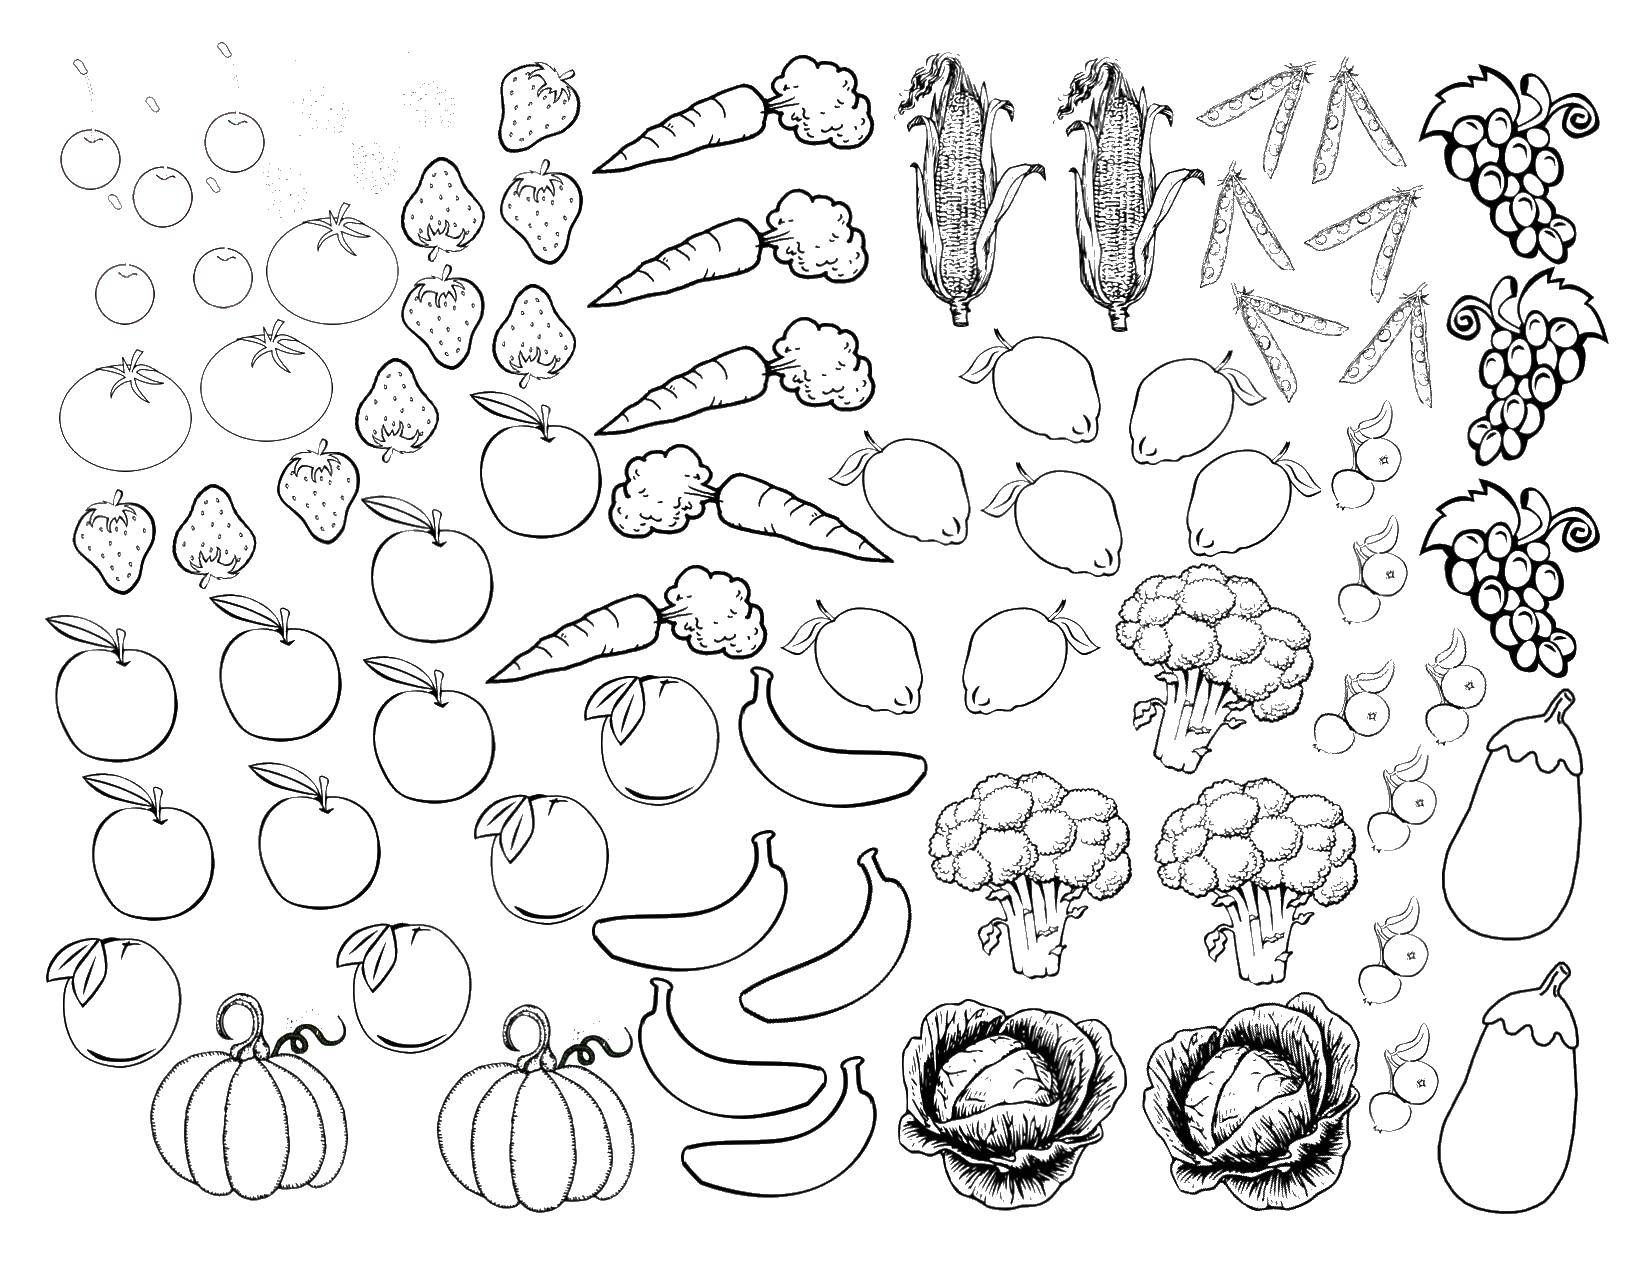 Coloring Fruits and vegetables. Category Vegetables. Tags:  fruits, vegetables.